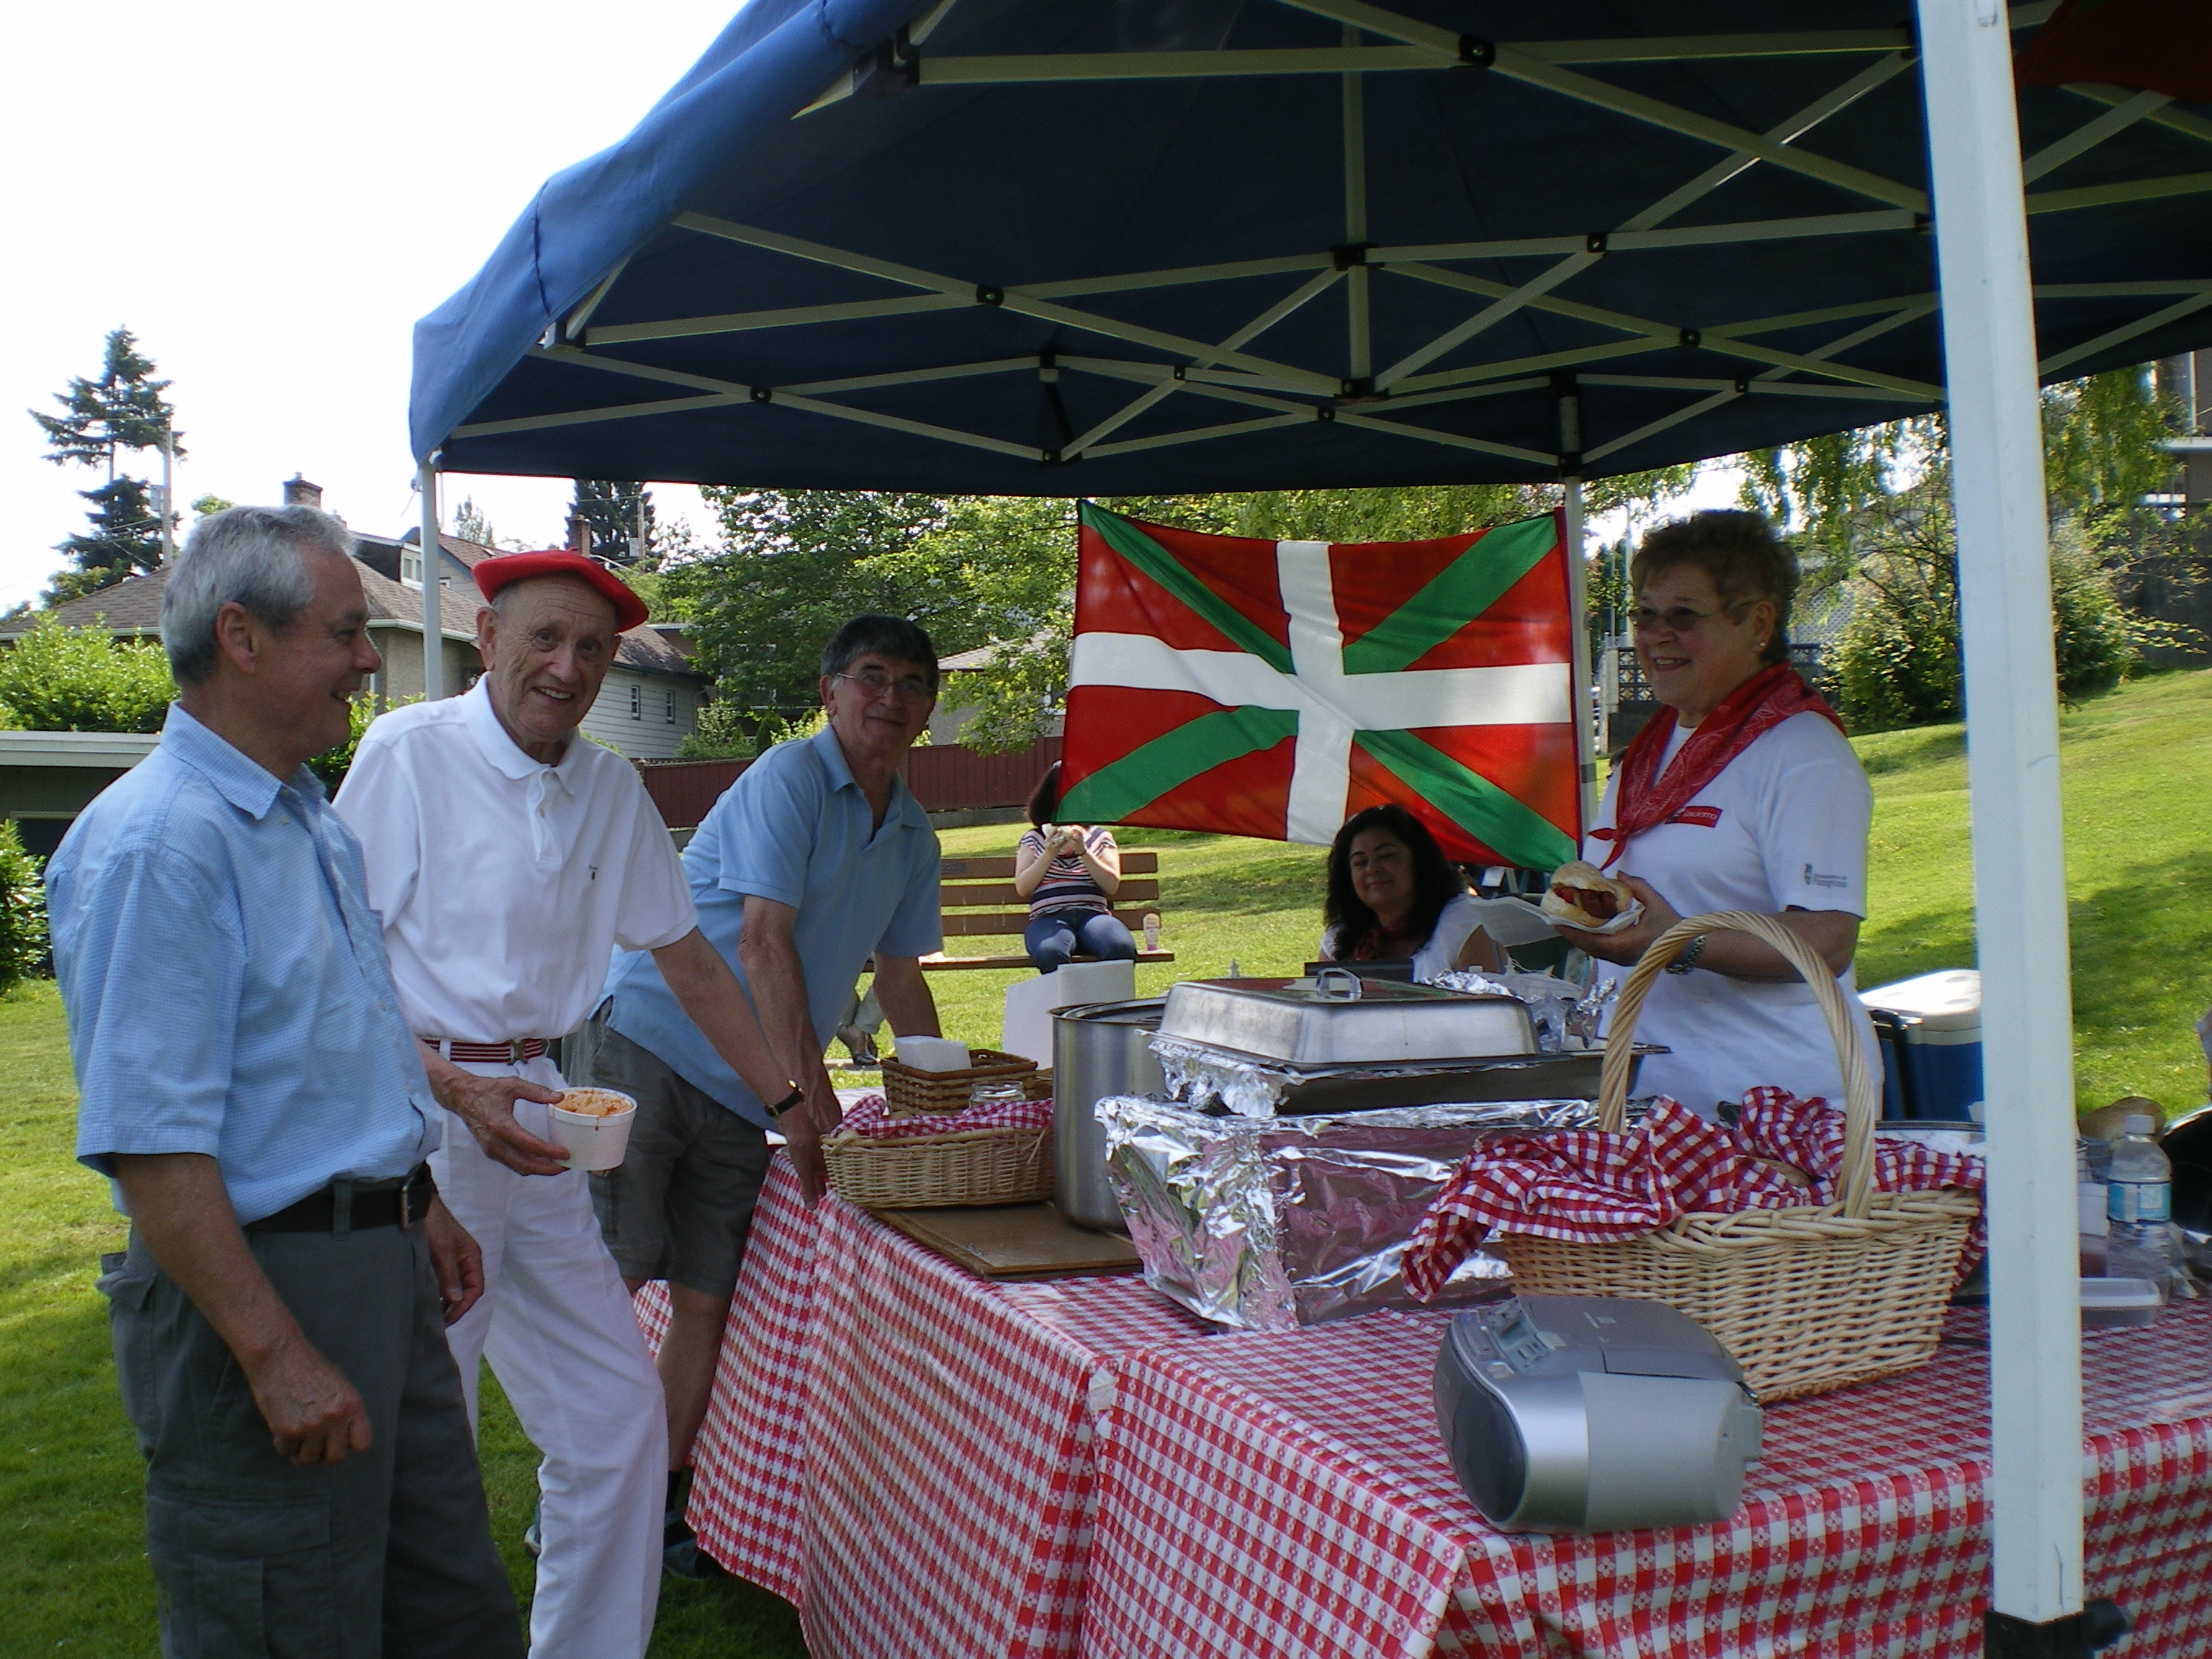 There is always a good atmosphere at the San Fermin picnic of Vancouver (British Columbia Basque Club)